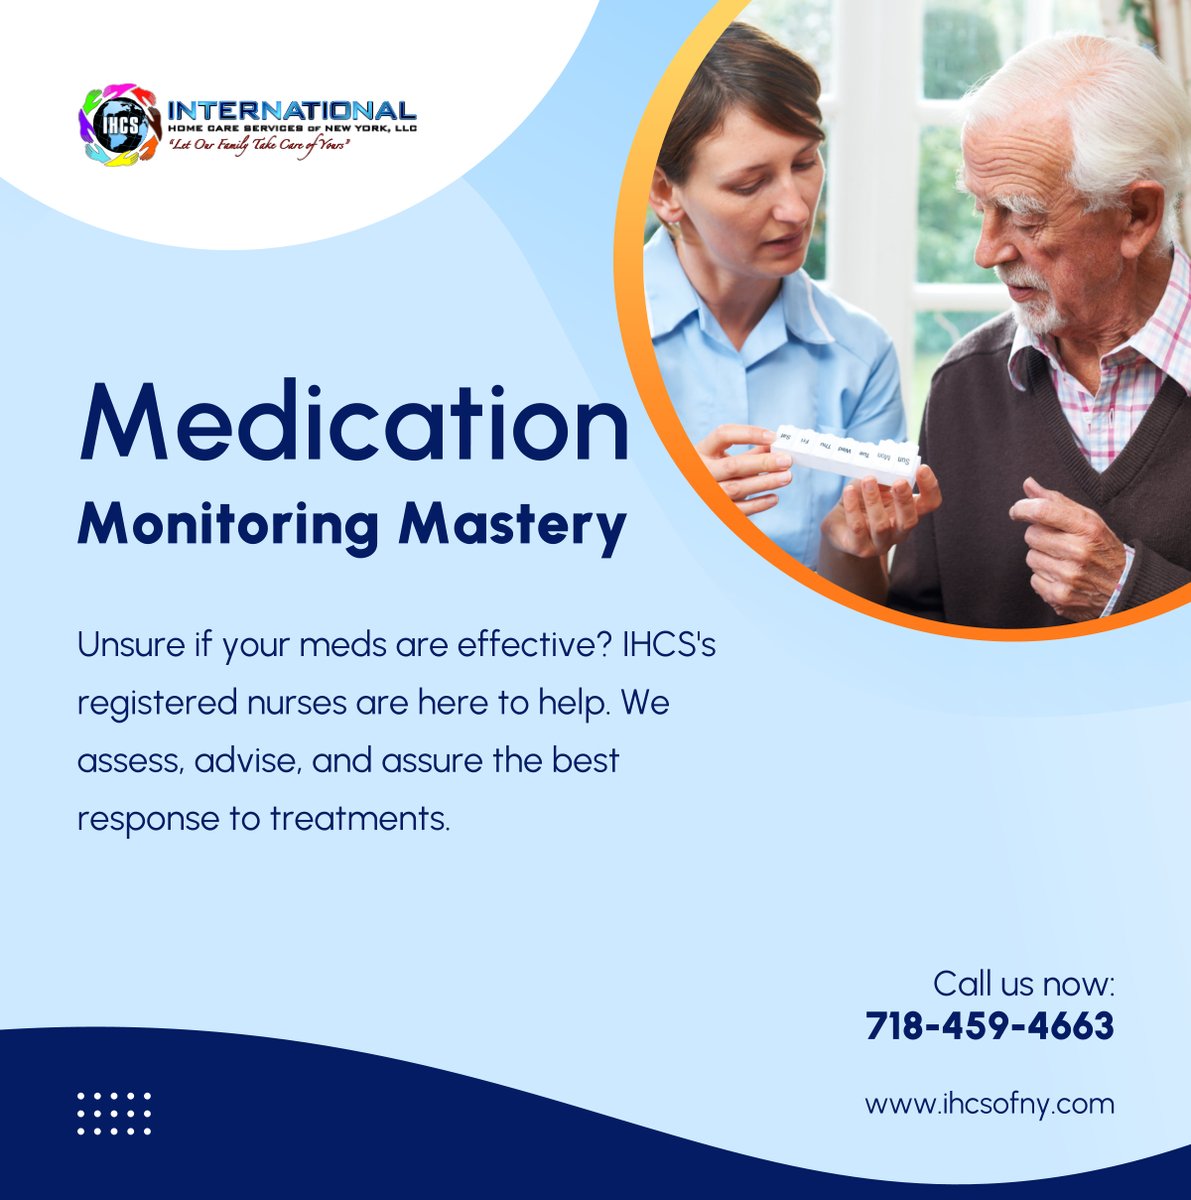 Your health is our priority. Partner with us and ensure your medication journey is tailored for success.

#MedicationMonitoring #HealthPriority #MedicationJourney #IHCS #Medication #SeniorCare #ElderlyCare #HomeCareInRegoParkNY #PersonalCare #HomeCare